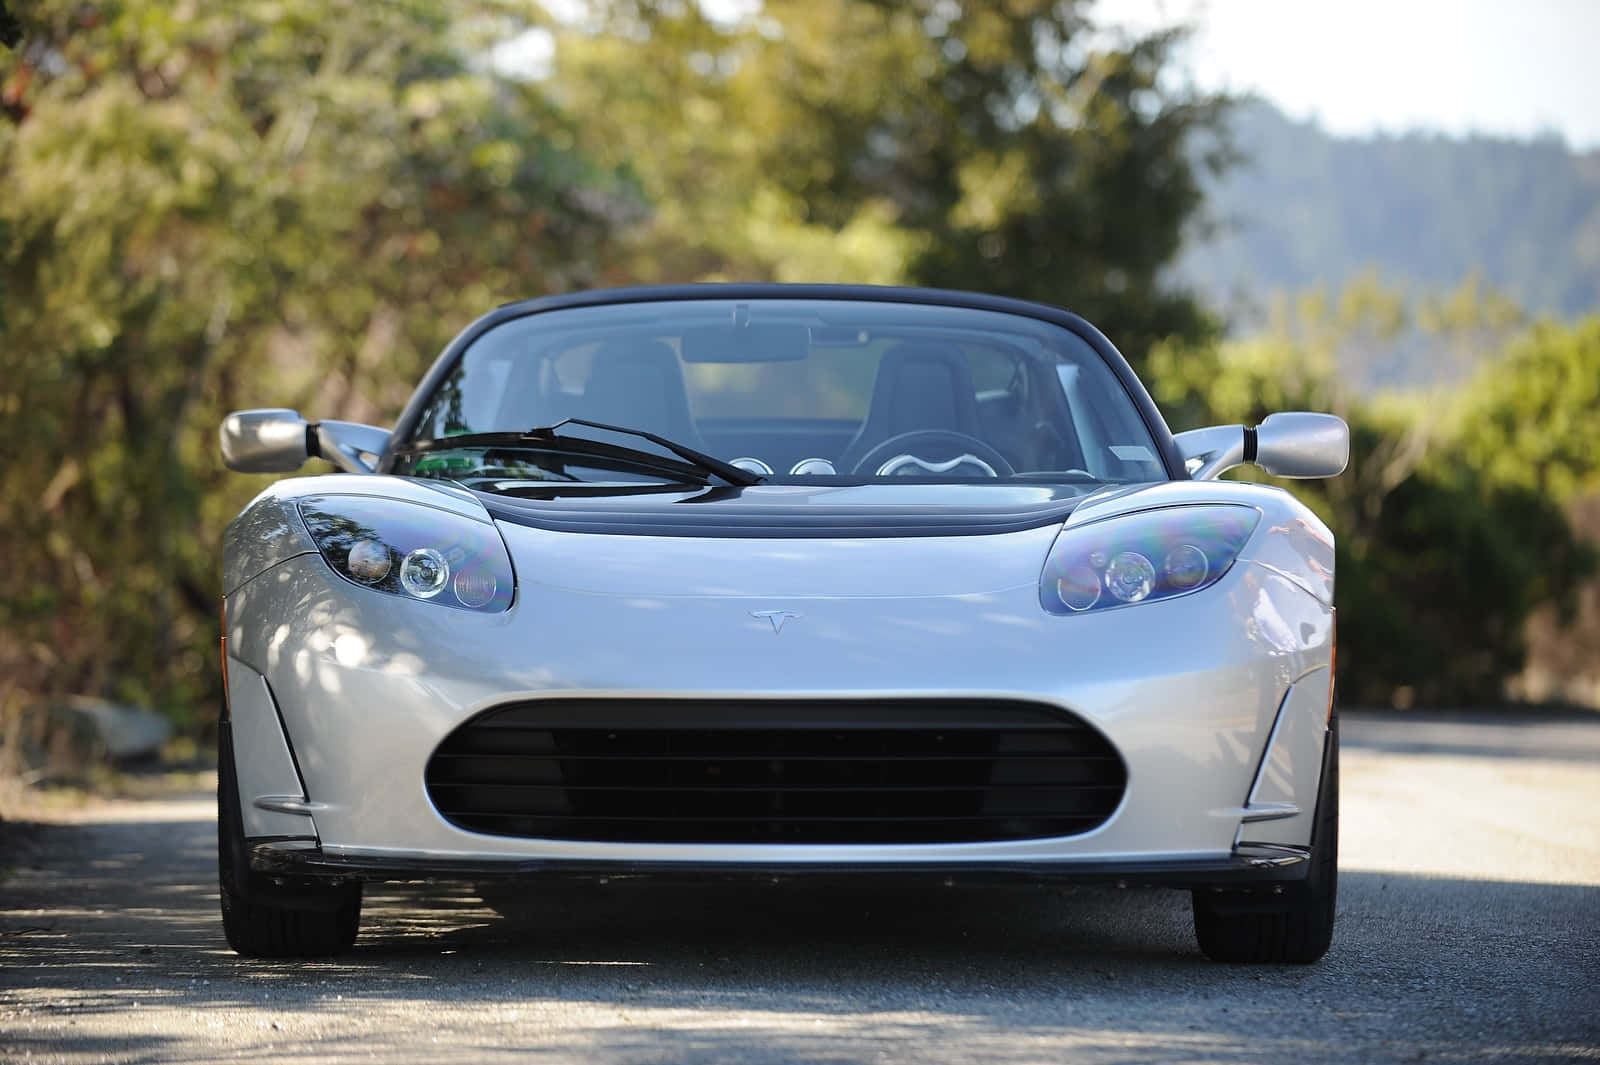 Luxurious Tesla Roadster - Innovation Meets Performance Background